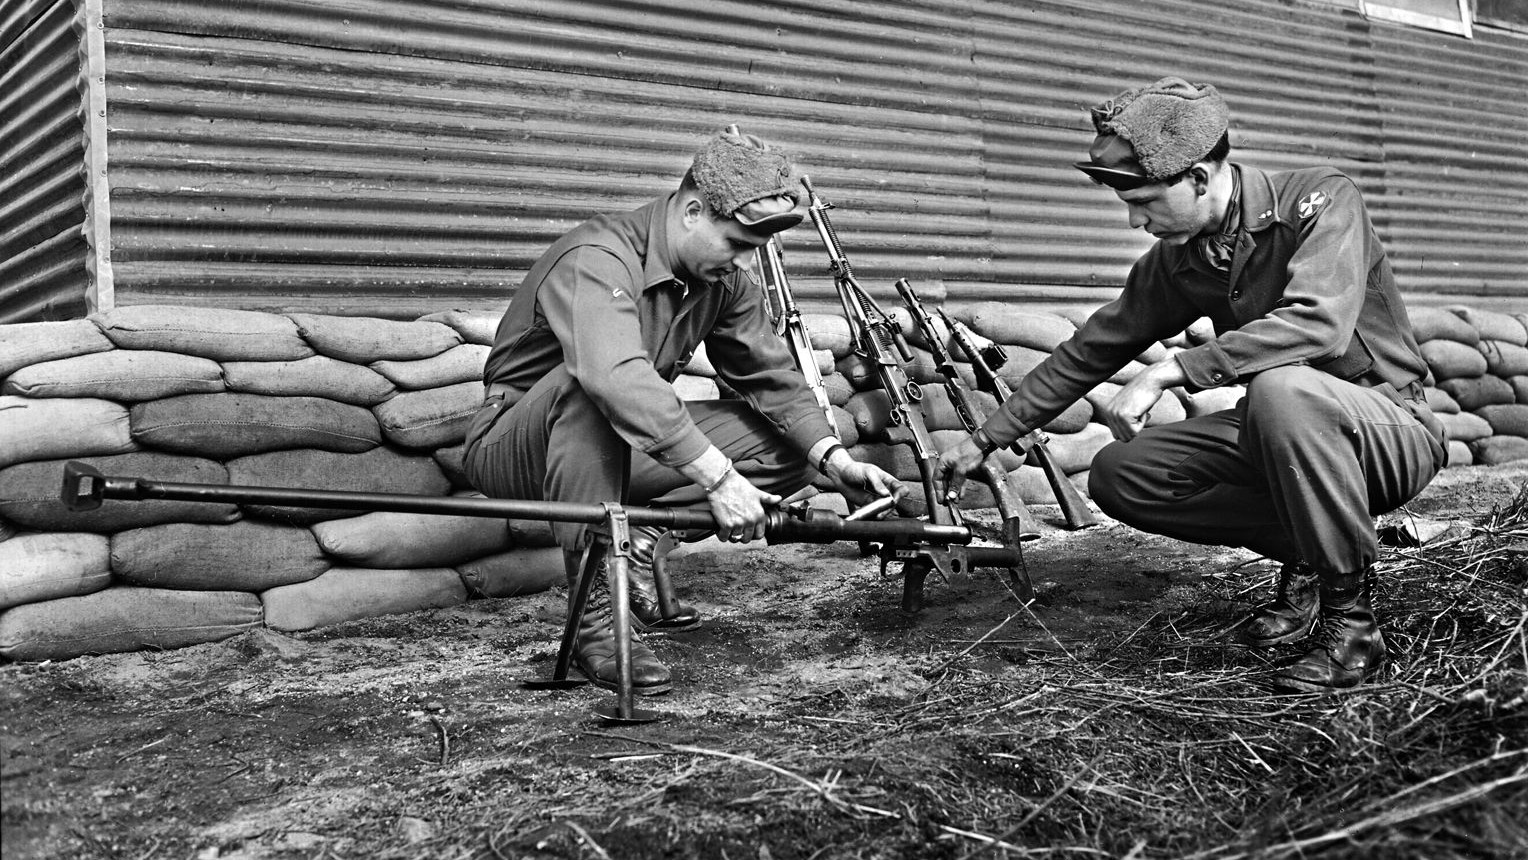 The PTRS 41 and Other and Russian Anti-Tank Rifles